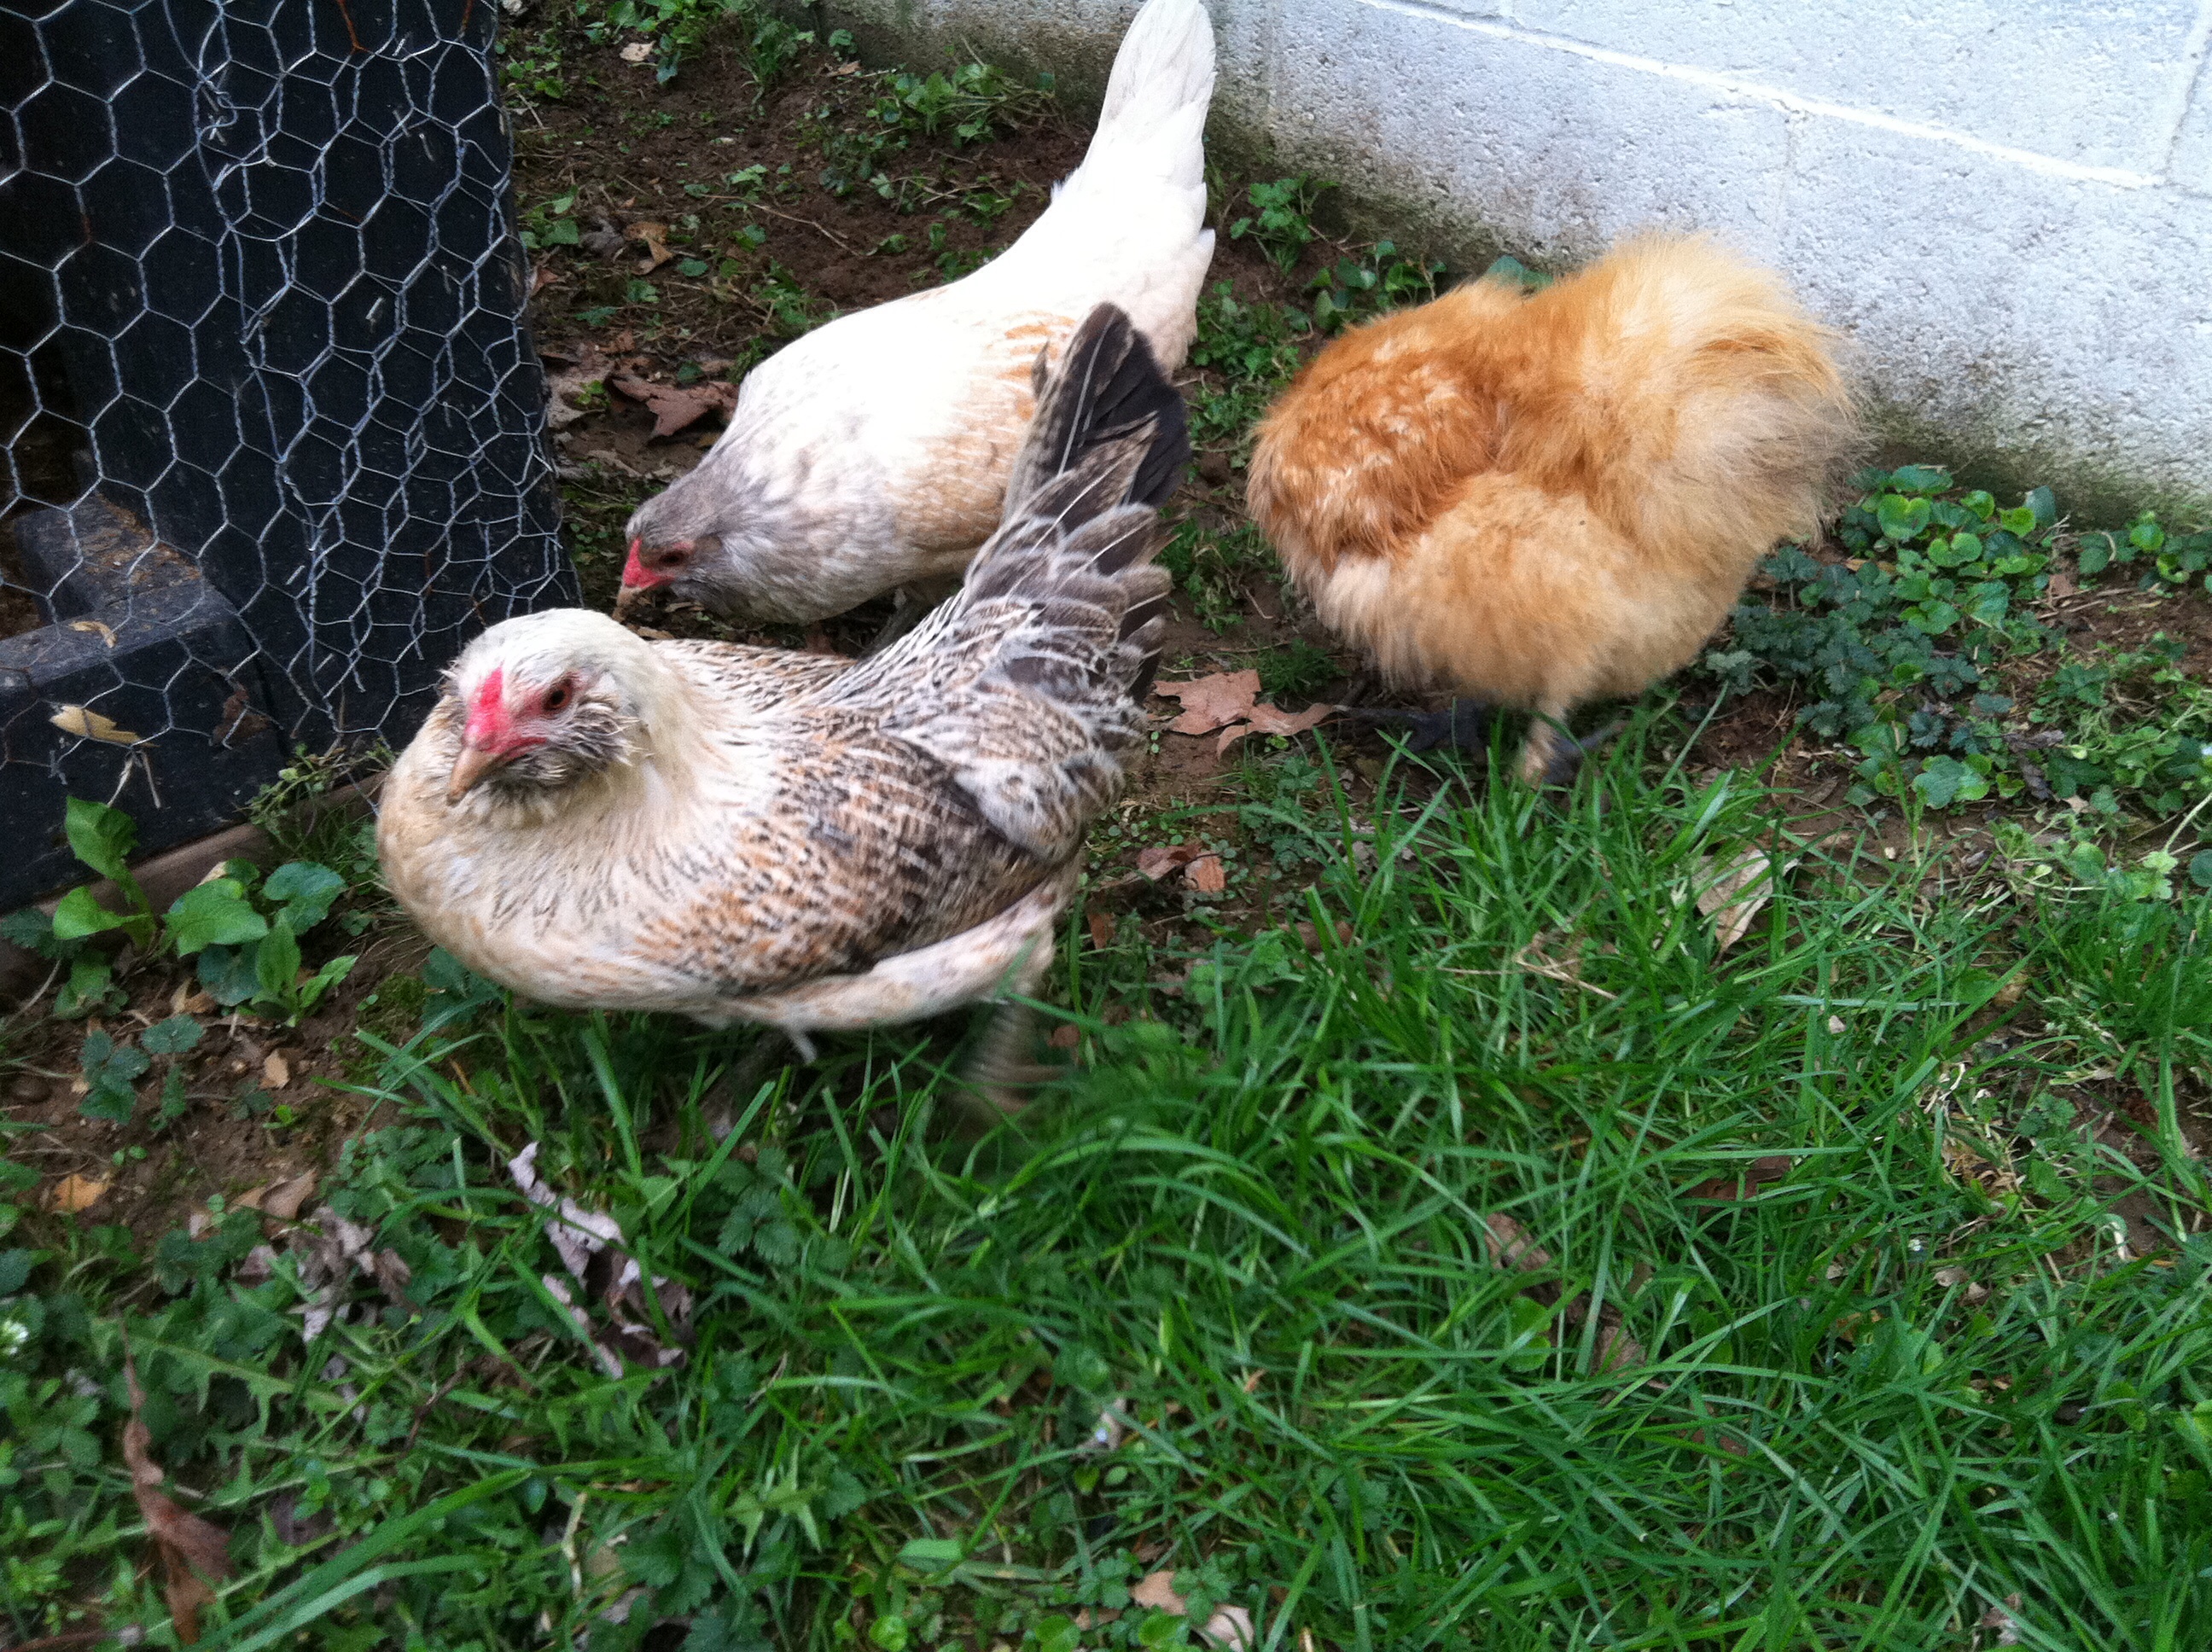 Here with Minnie are Dolly & June, they are both Easter egger bantams.